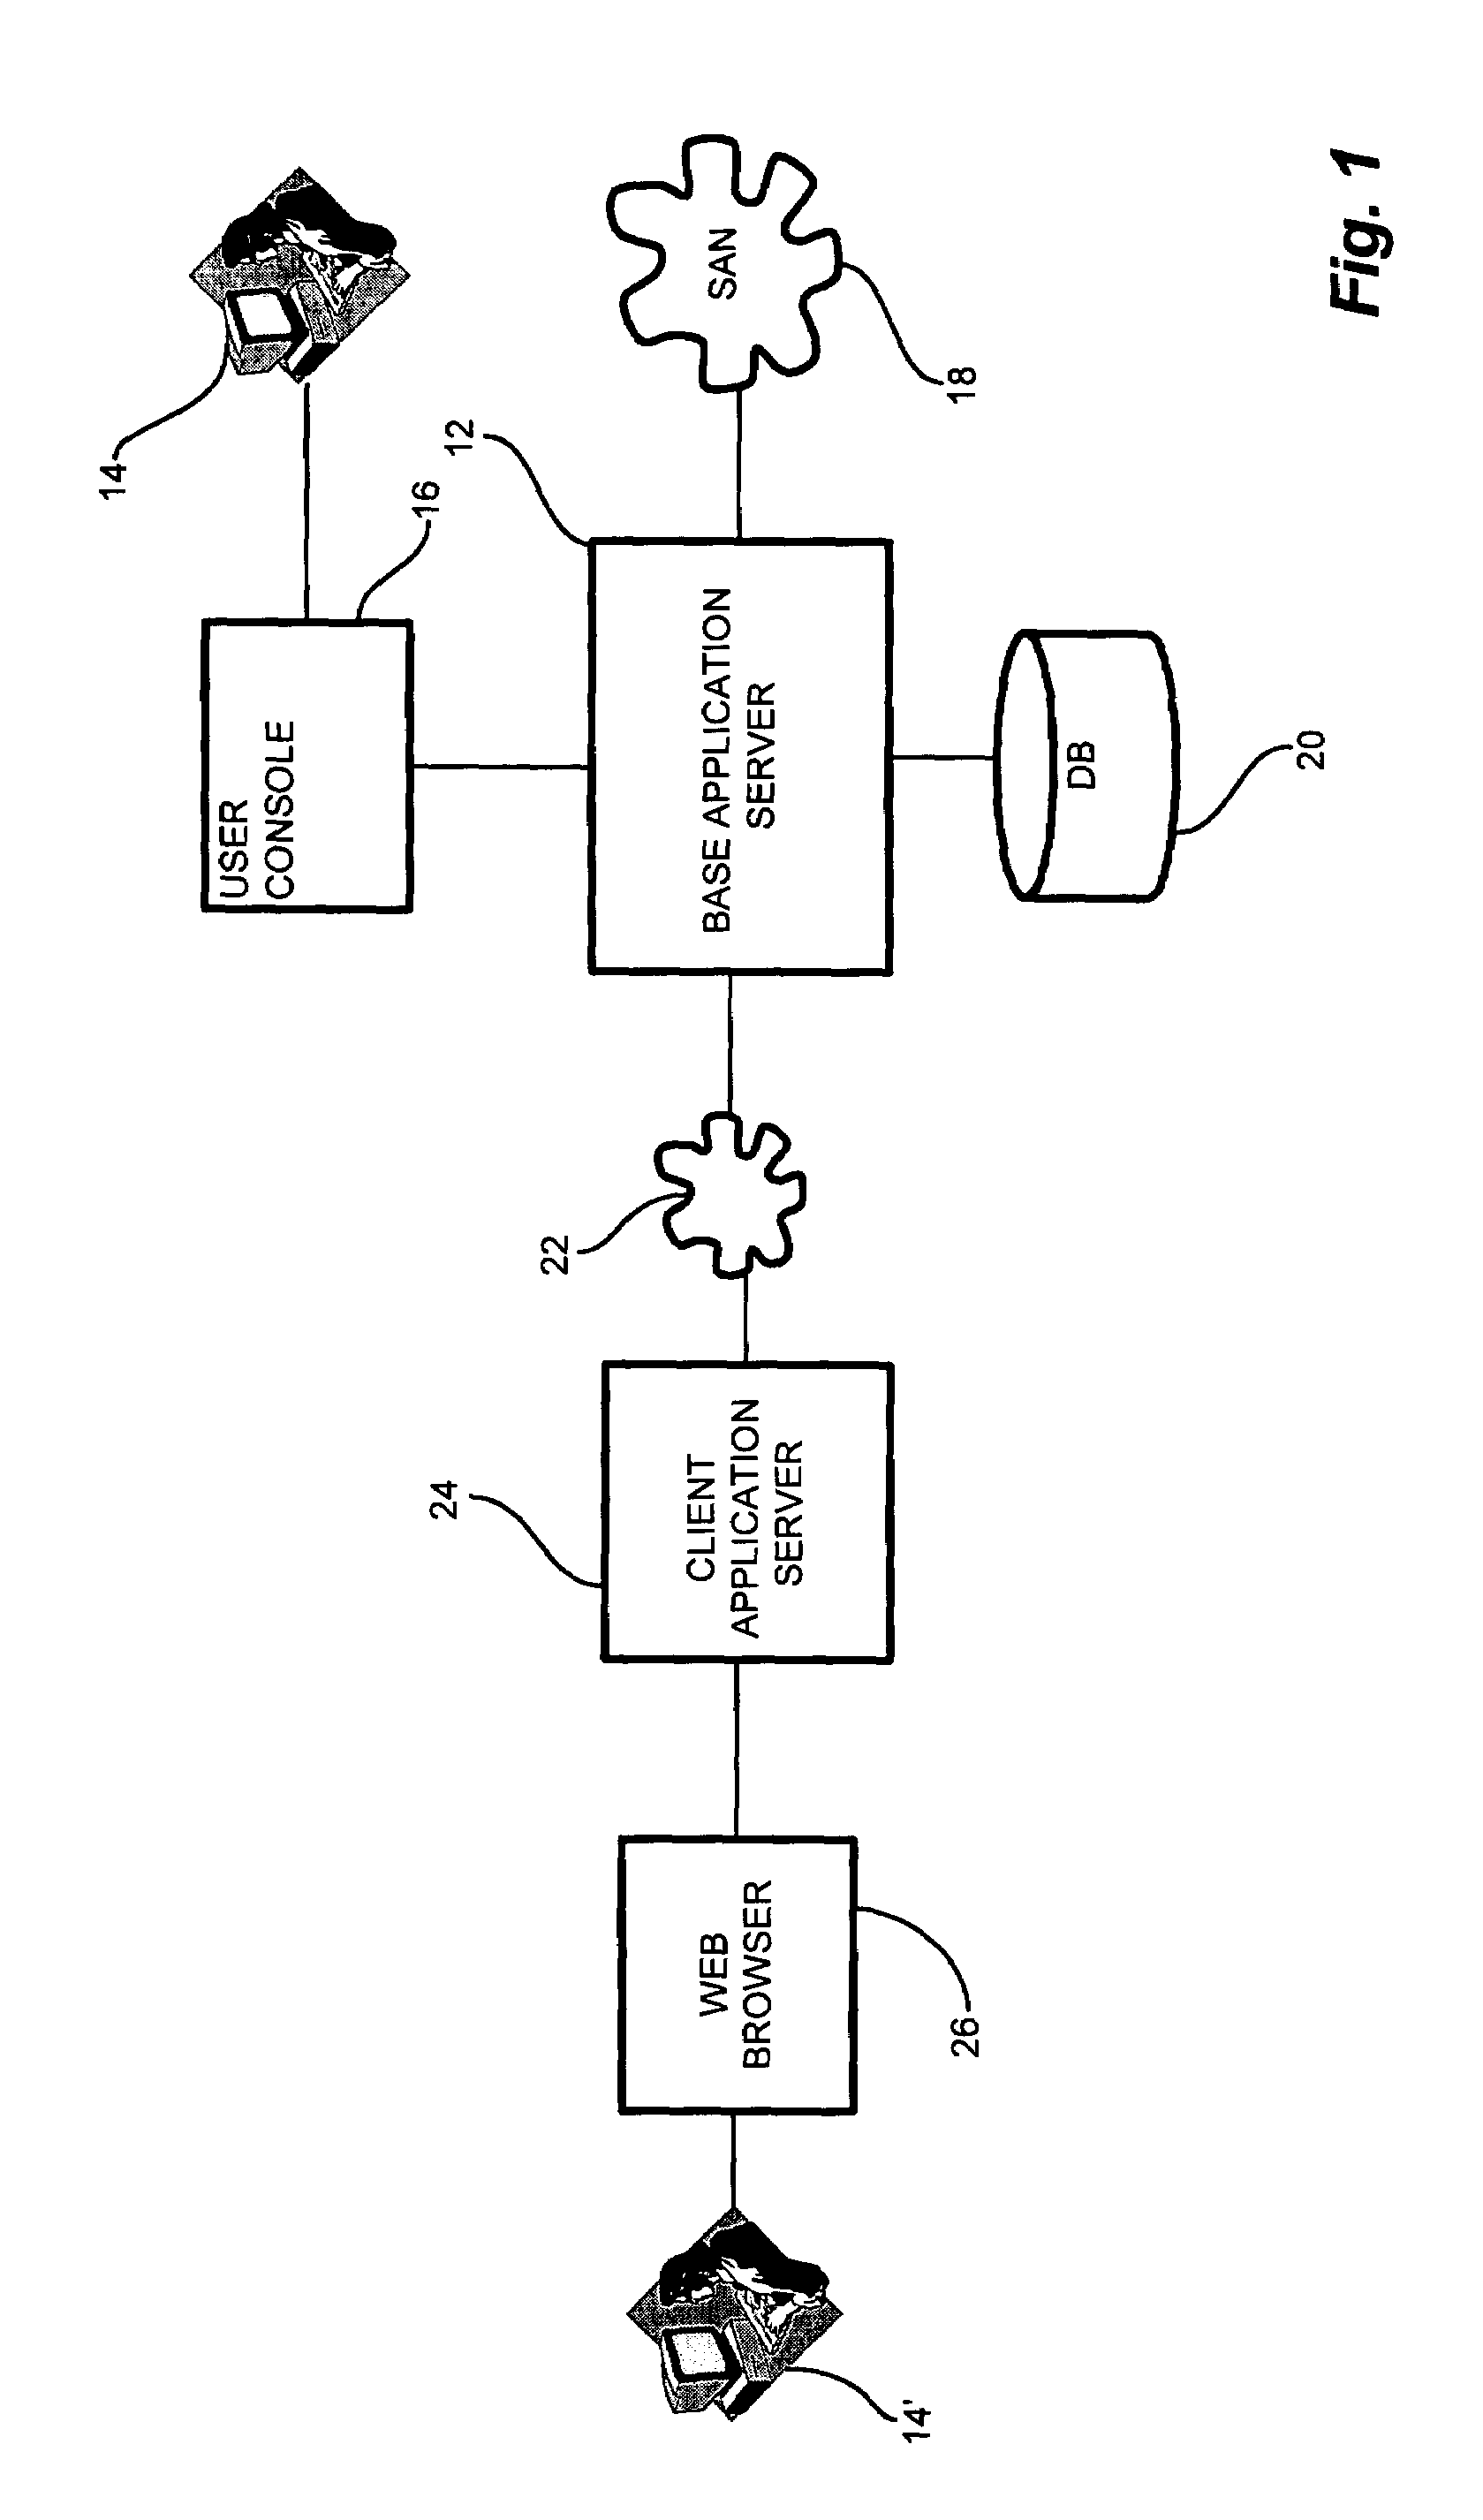 System and methods for deploying and invoking a distributed object model